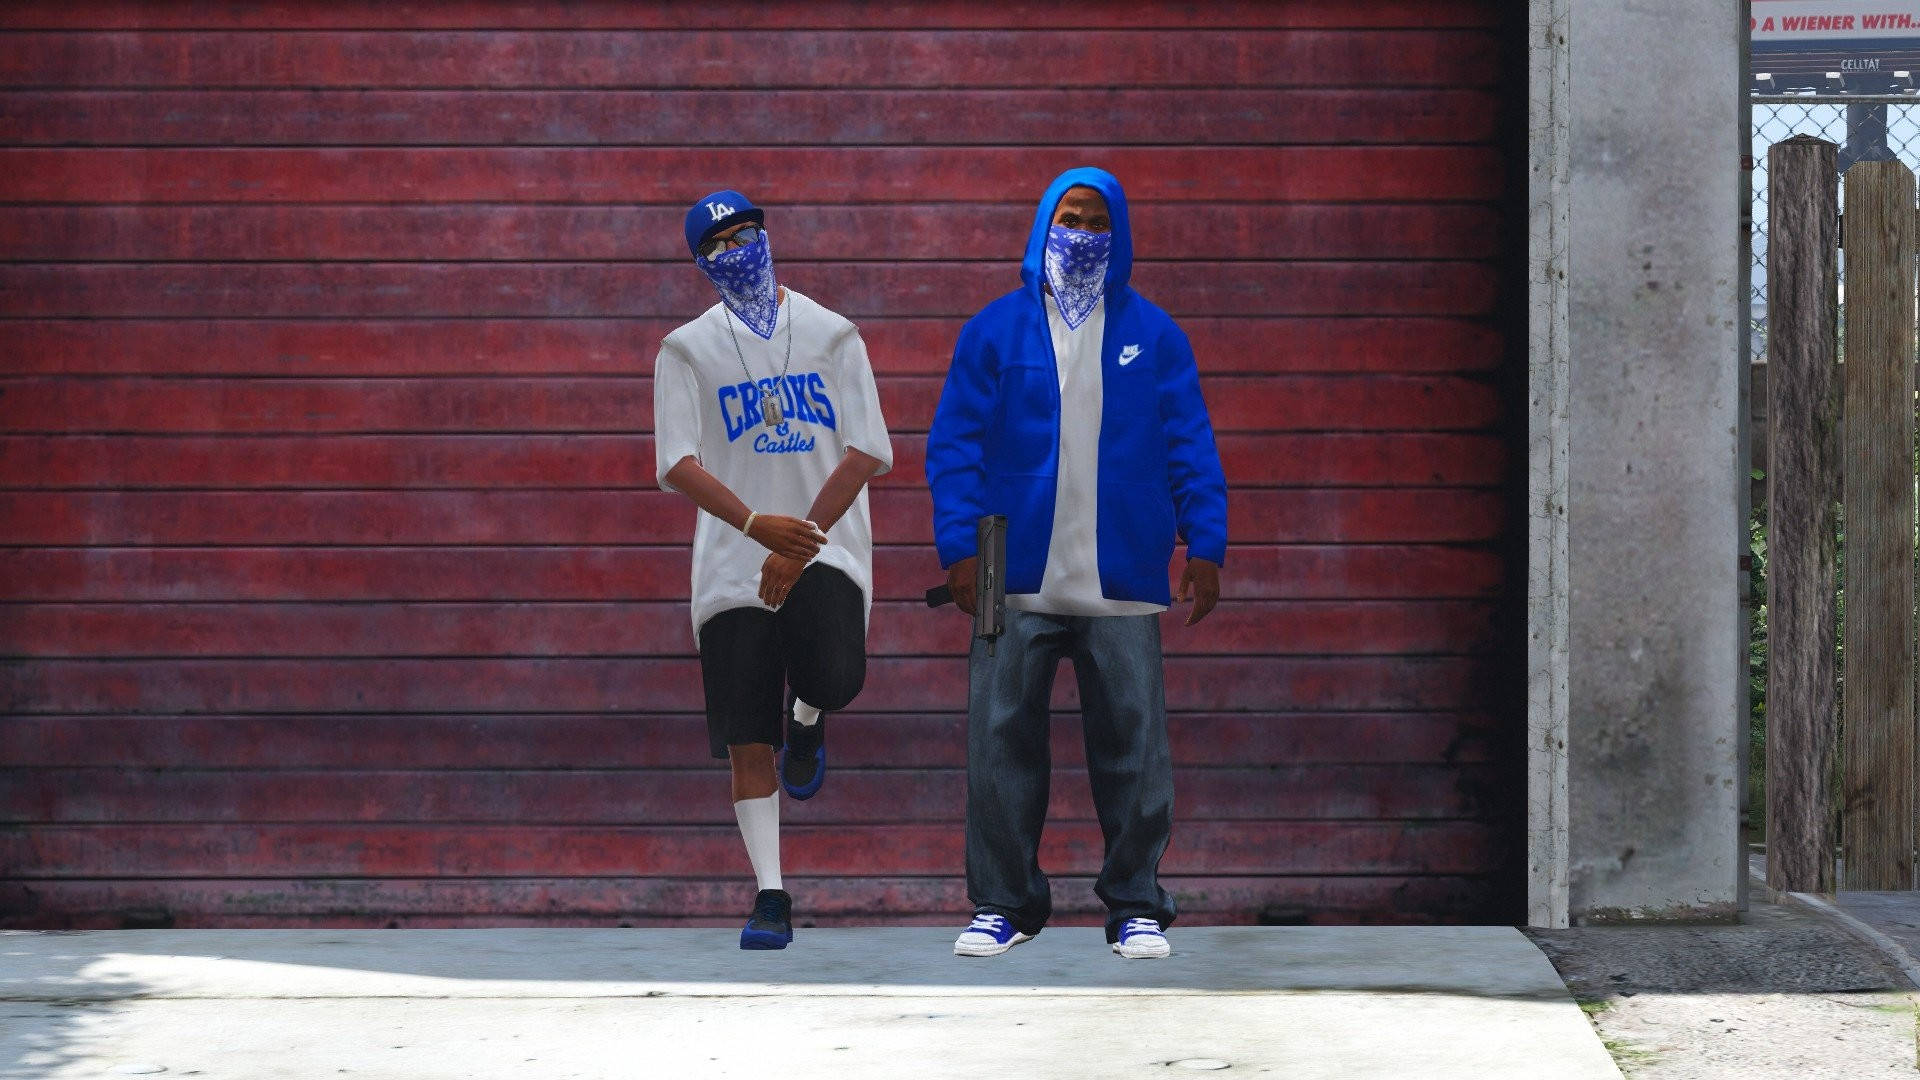 Crip 1920X1080 Wallpaper and Background Image